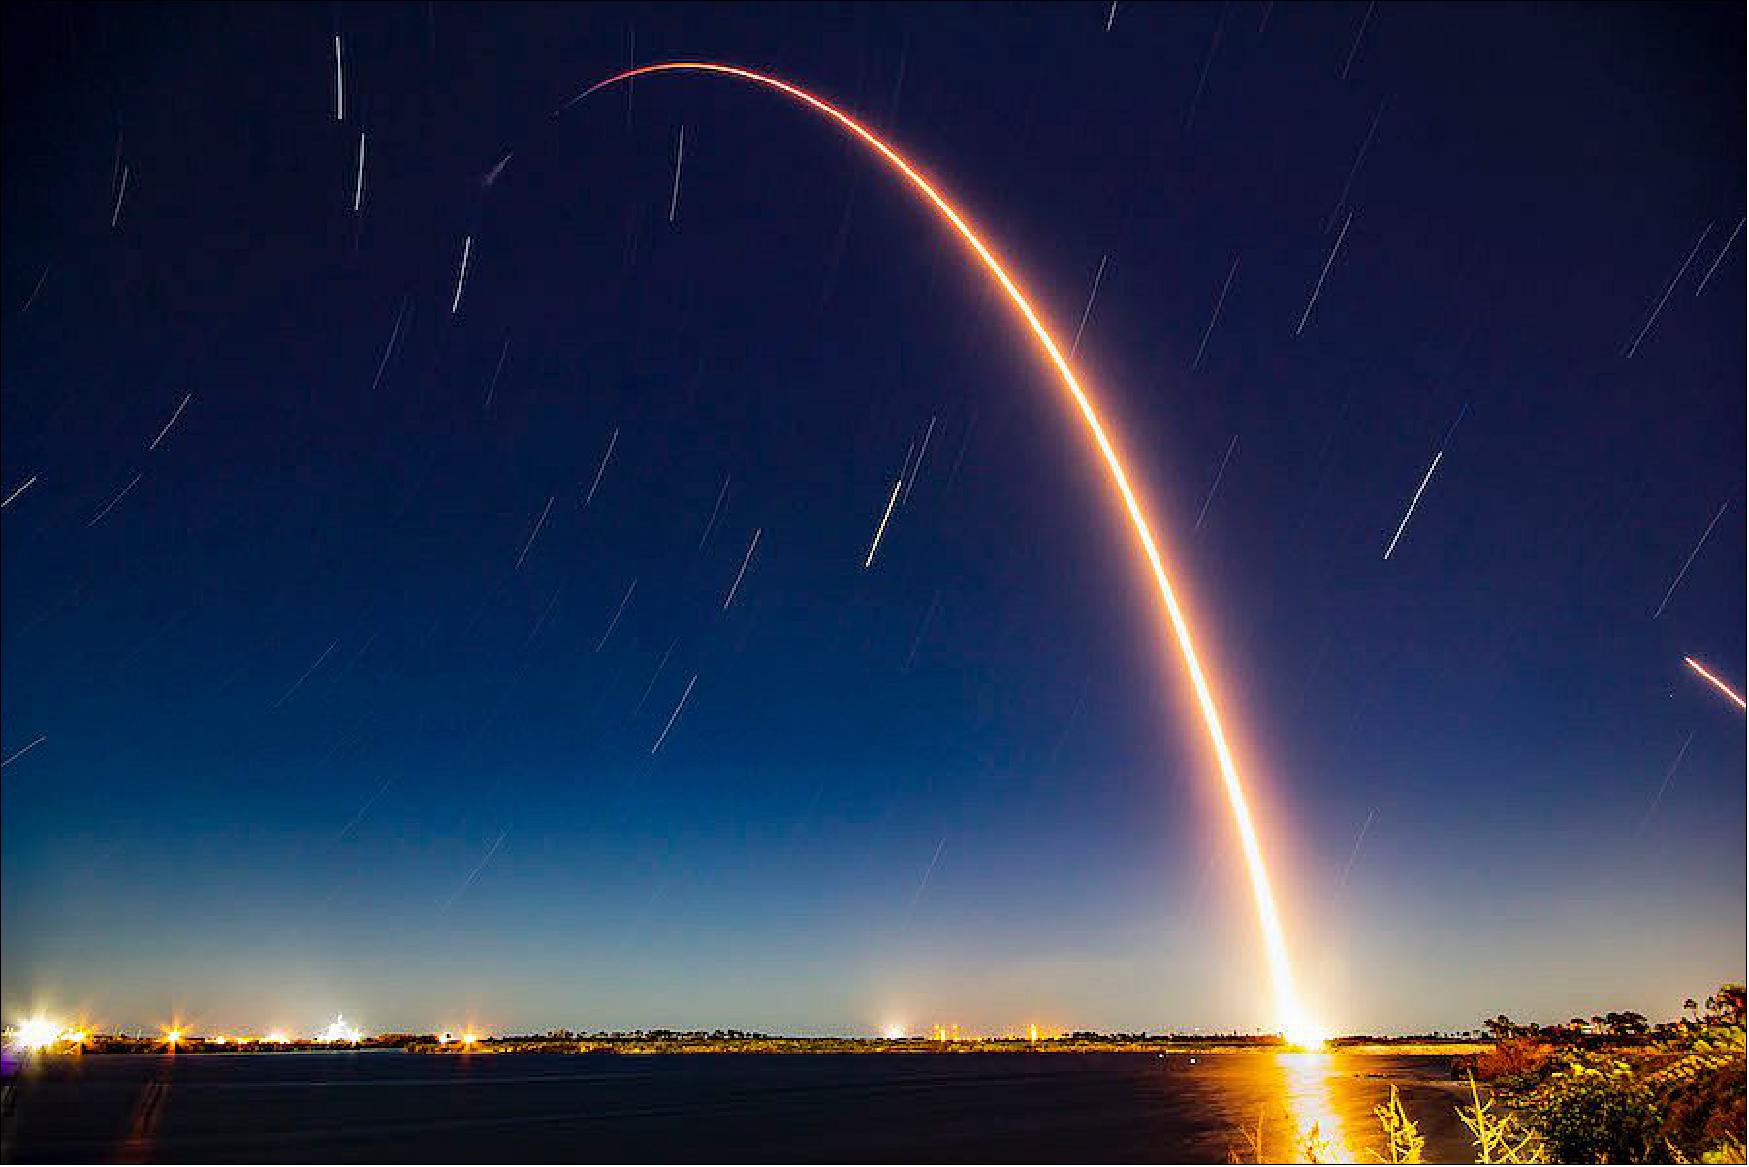 Figure 12: A Falcon 9 rocket streaks into space in this long exposure photo taken Friday night at 11:50:31 p.m. EST, 6 March (04:50:31 UTC on 7 March 2020), image credit: SpaceX)